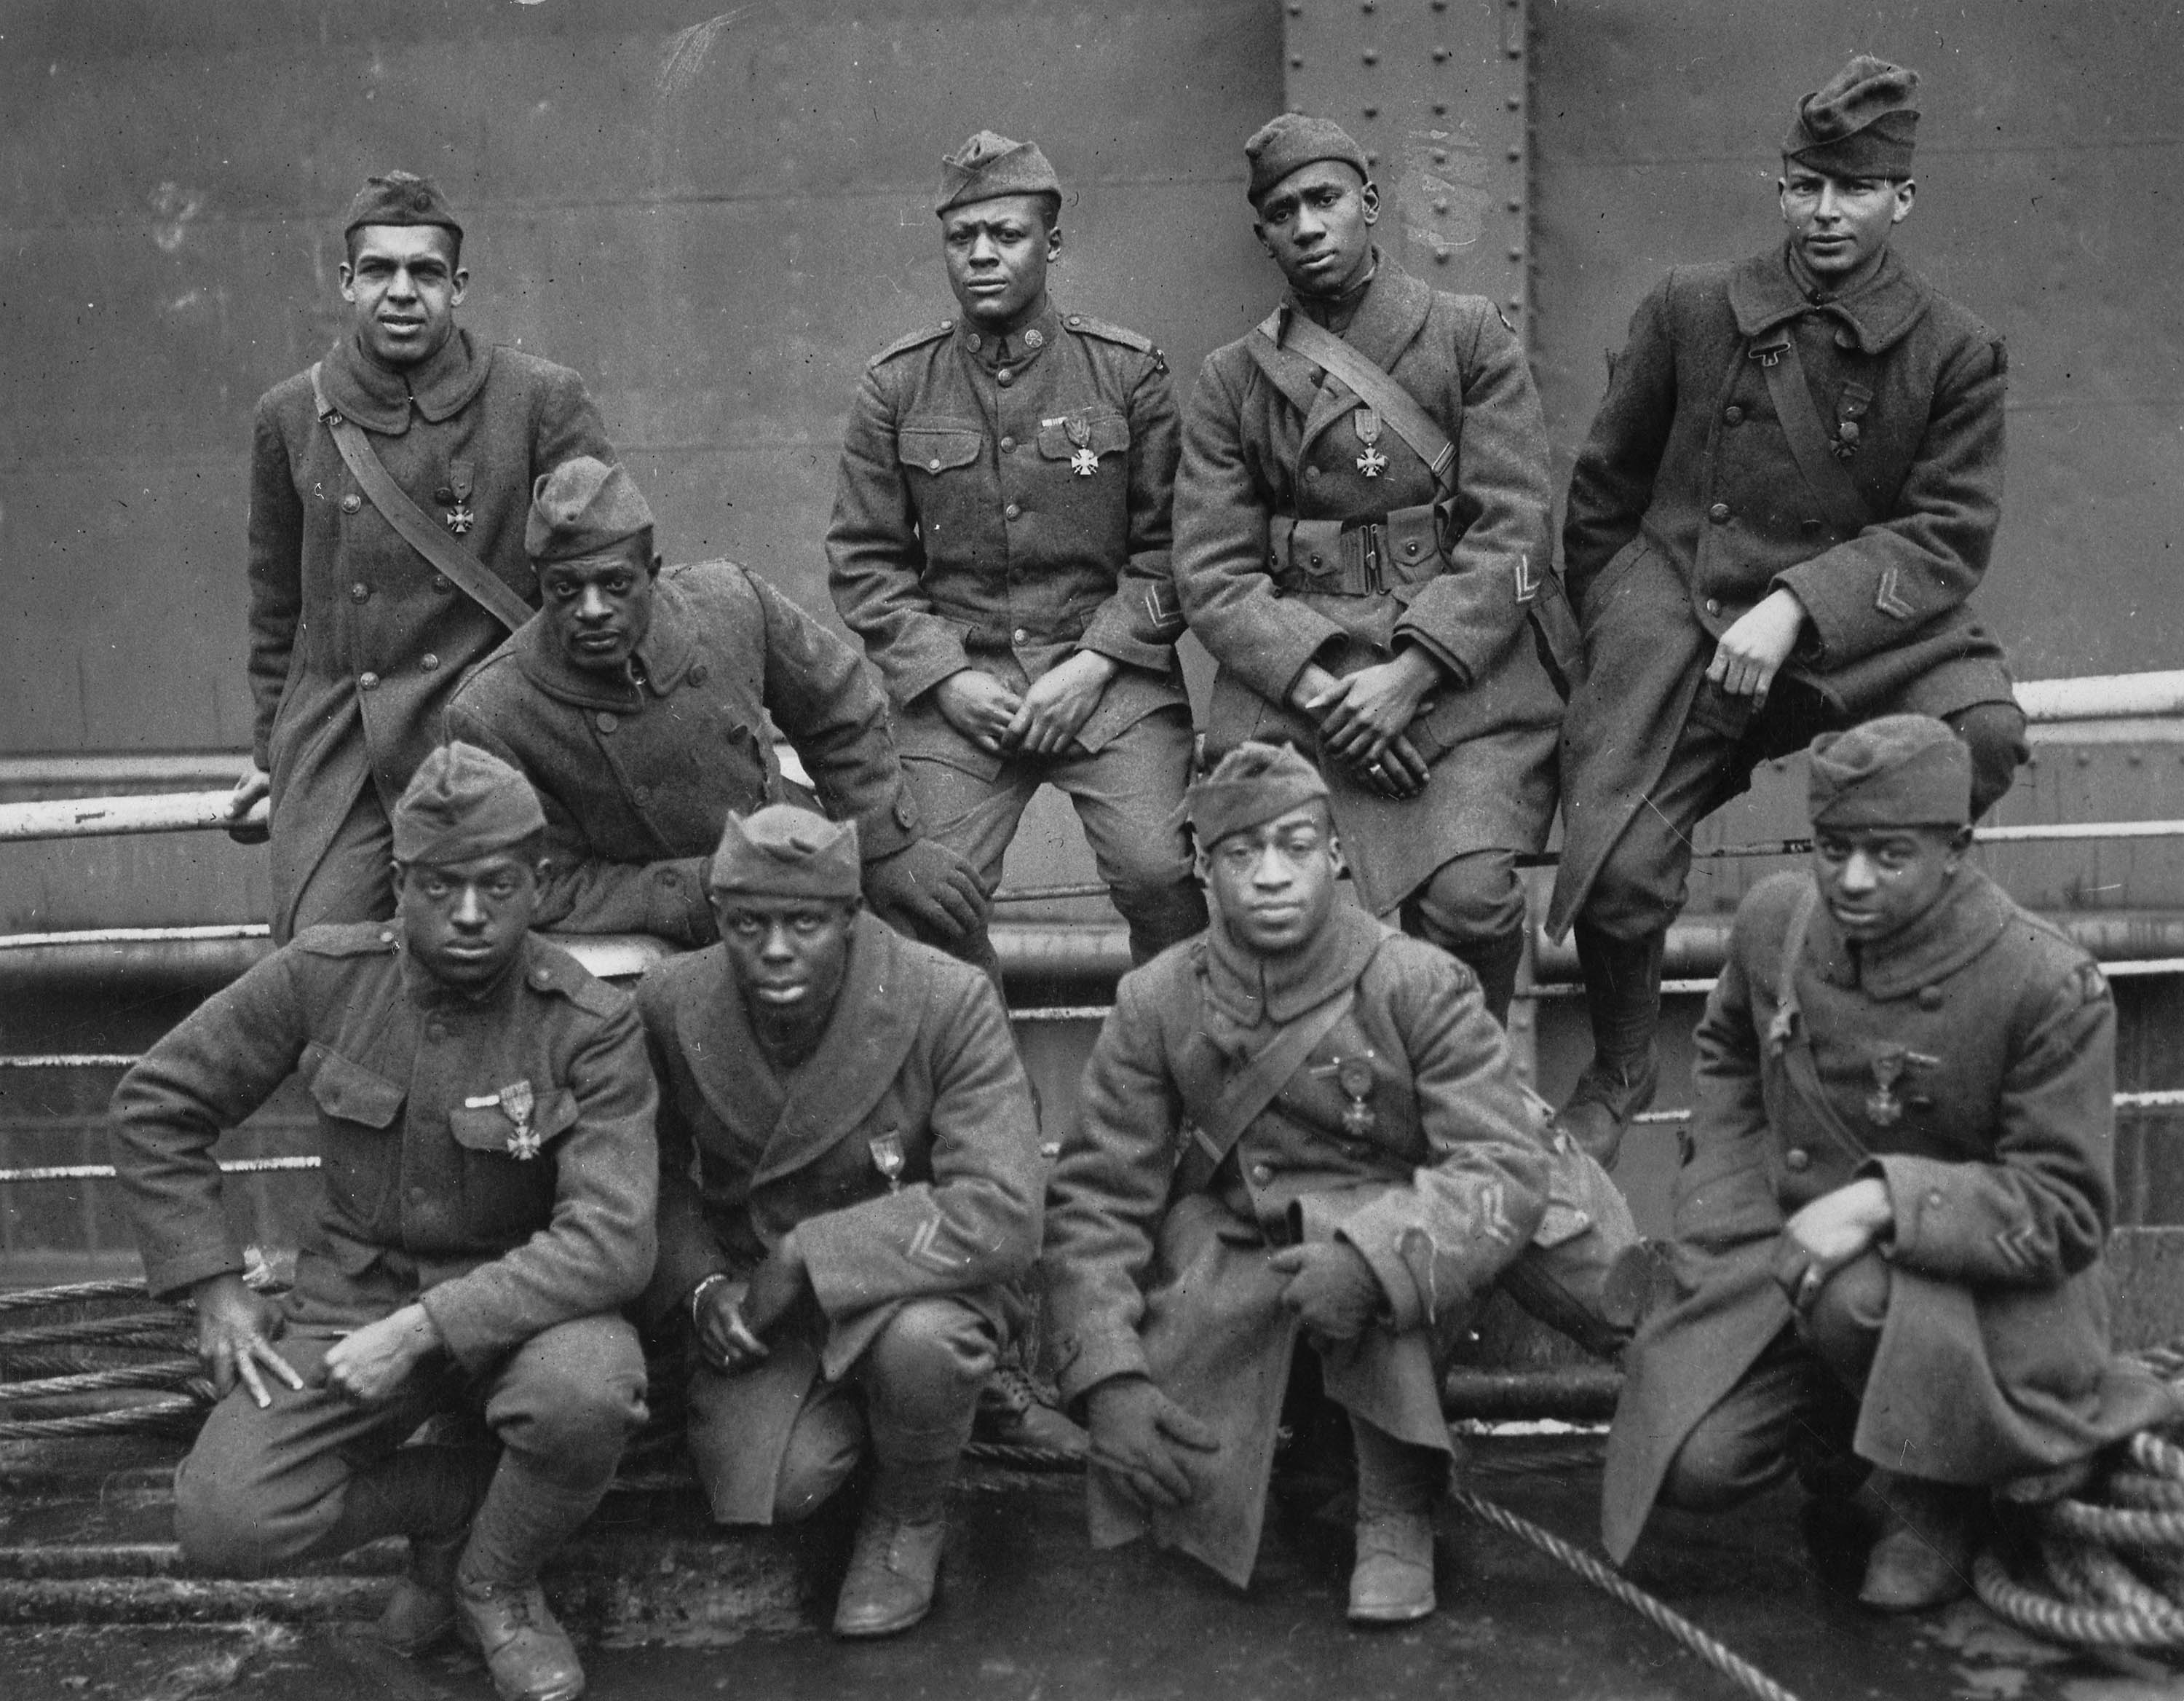 Harlem Hellfighters – Soldiers of the 369th Infantry Regiment, (15th N.Y. National Guard Regiment) who won the Croix de Guerre for gallantry in action, WWI -1919